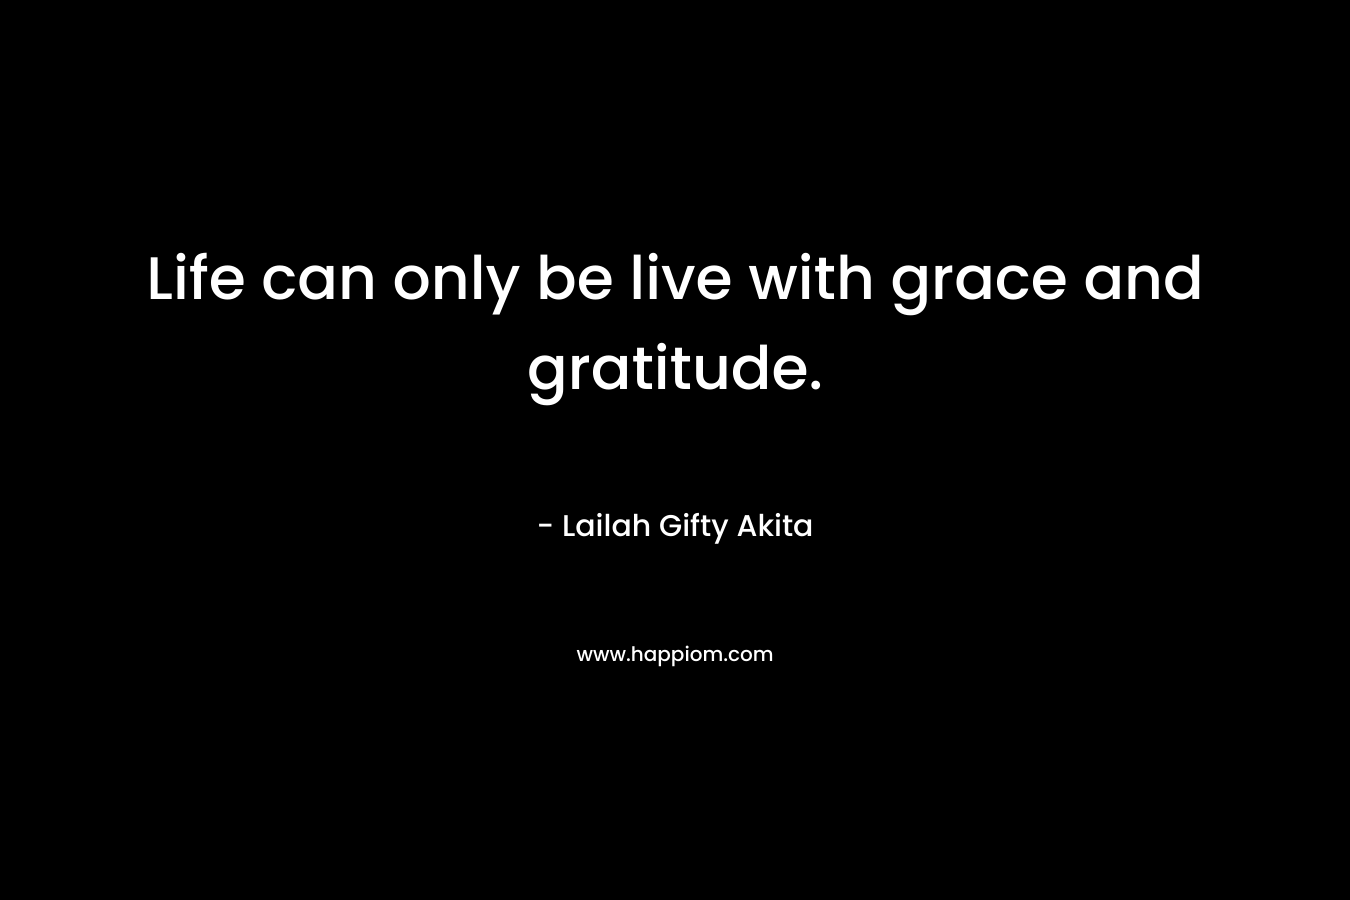 Life can only be live with grace and gratitude.